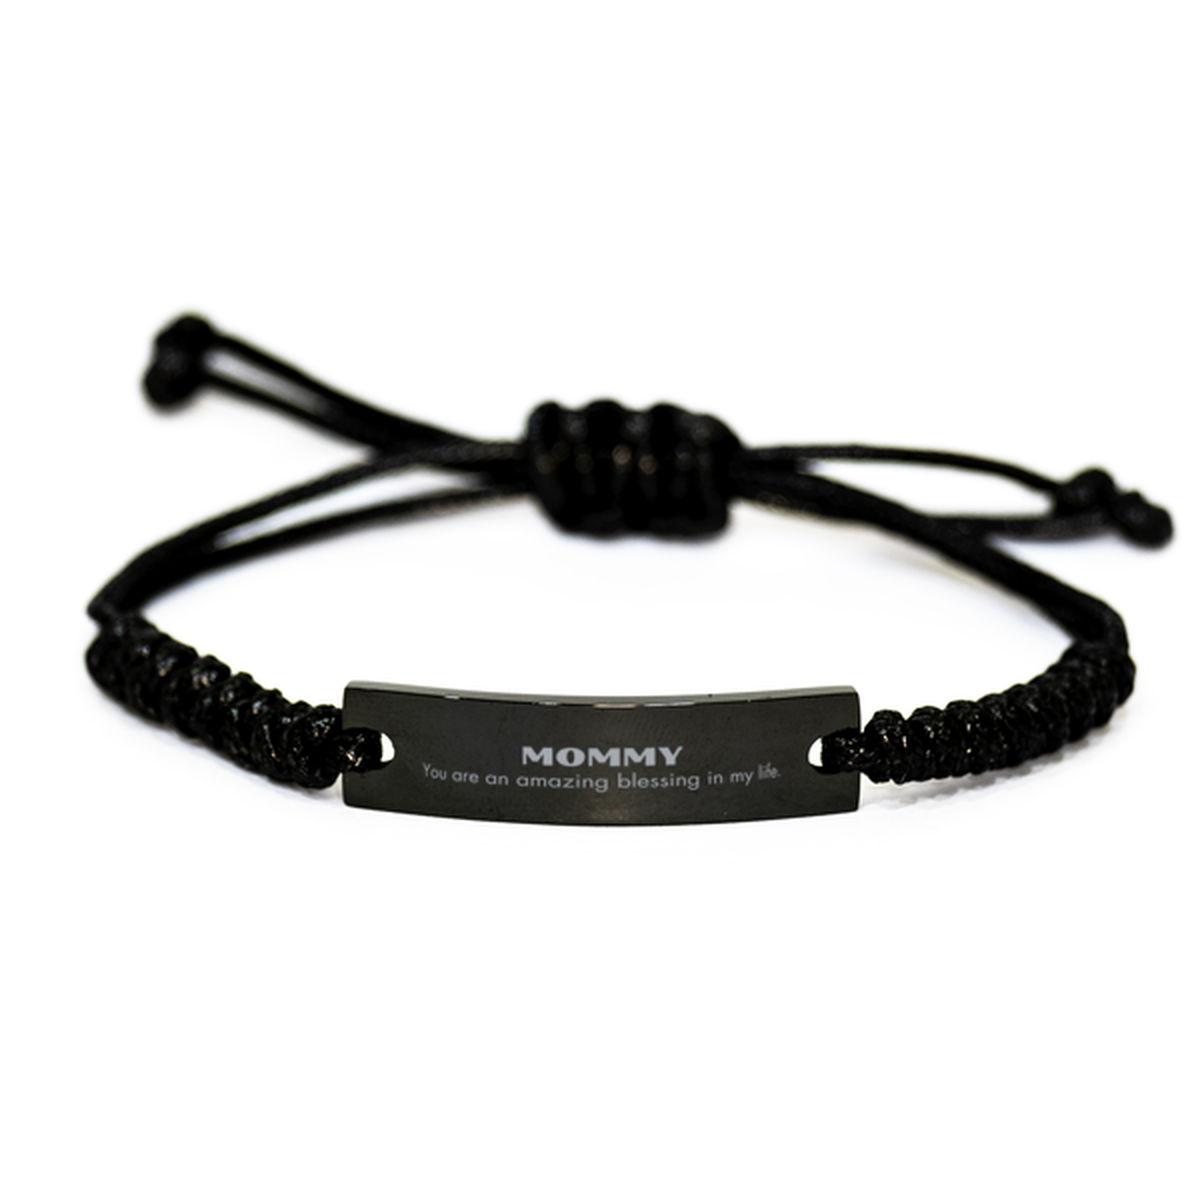 Mommy Black Rope Bracelet, You are an amazing blessing in my life, Thank You Gifts For Mommy, Inspirational Birthday Christmas Unique Gifts For Mommy